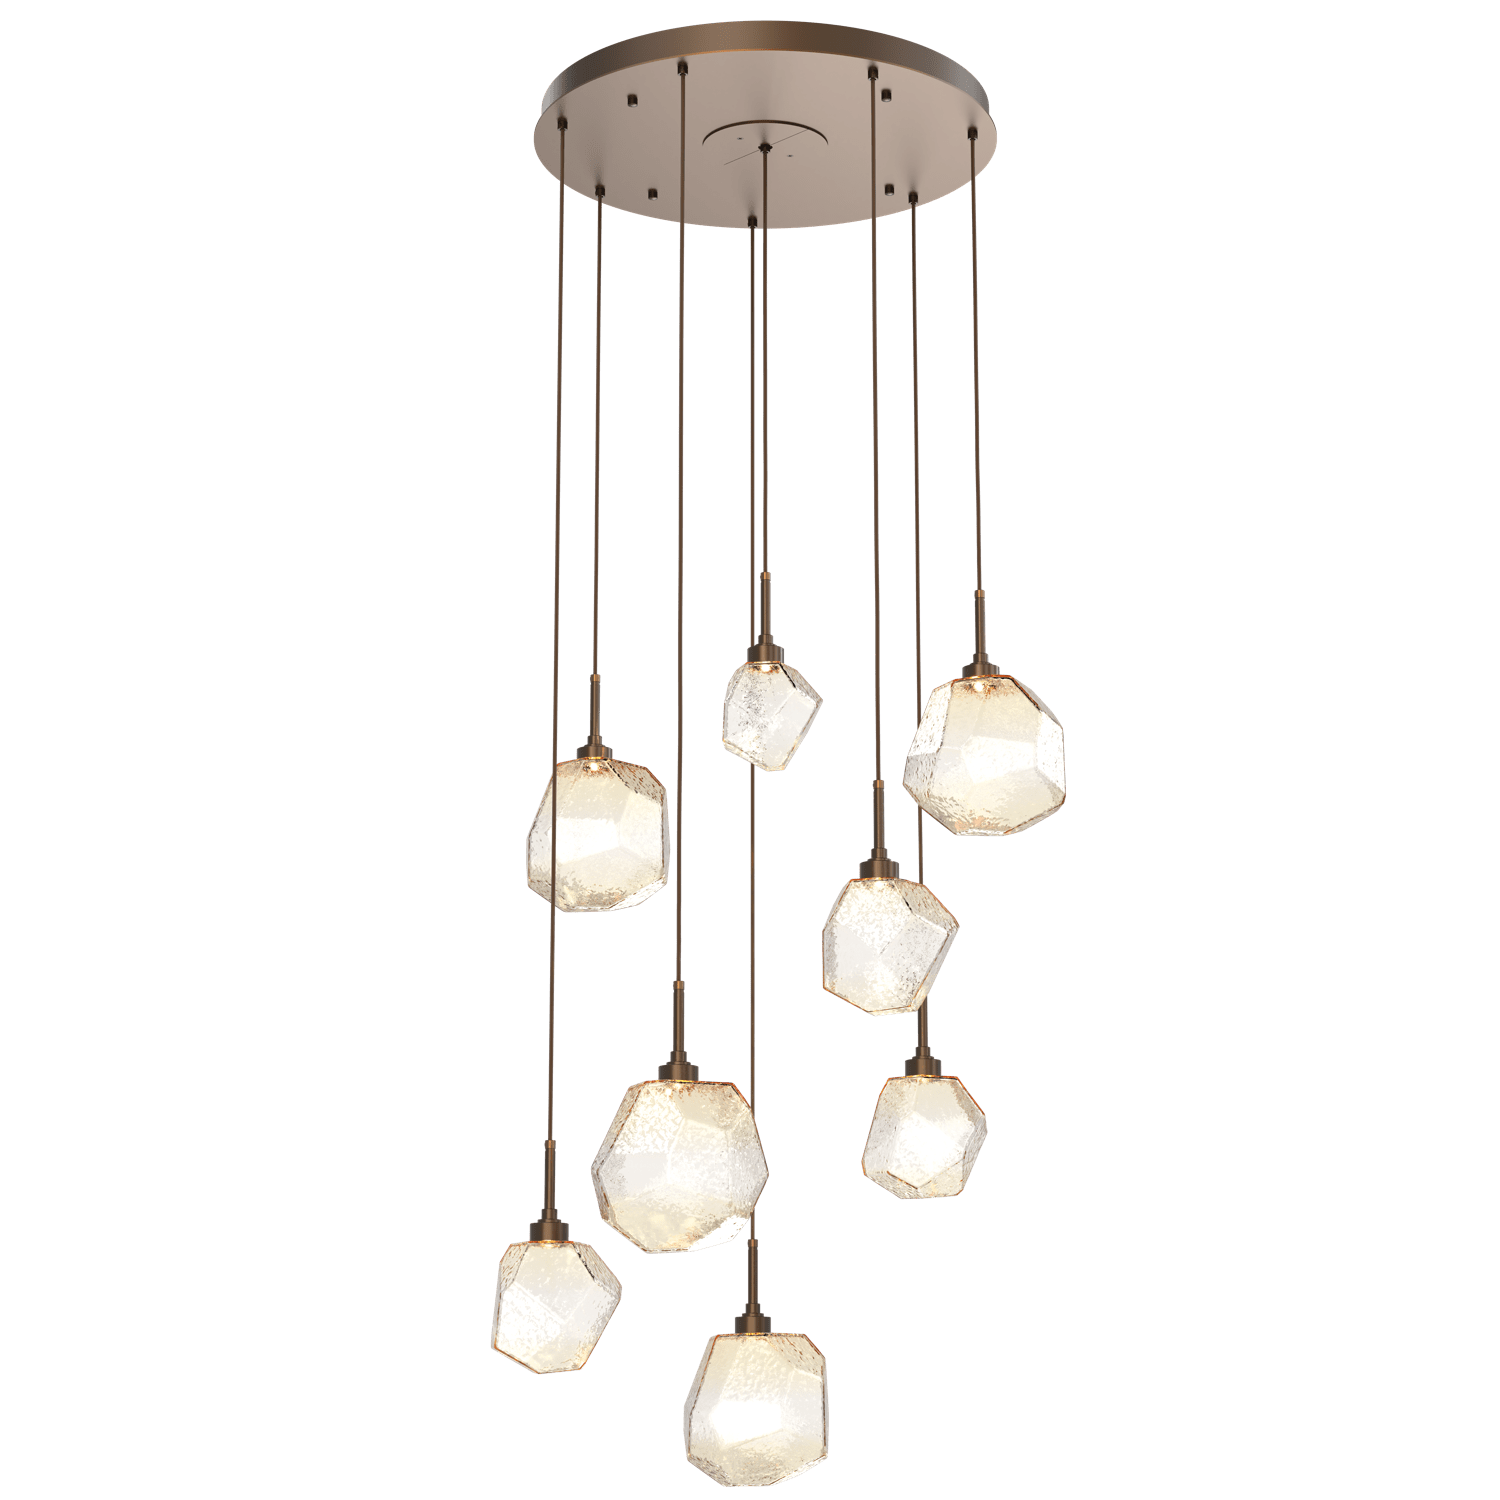 CHB0039-08-FB-A-Hammerton-Studio-Gem-8-light-round-pendant-chandelier-with-flat-bronze-finish-and-amber-blown-glass-shades-and-LED-lamping